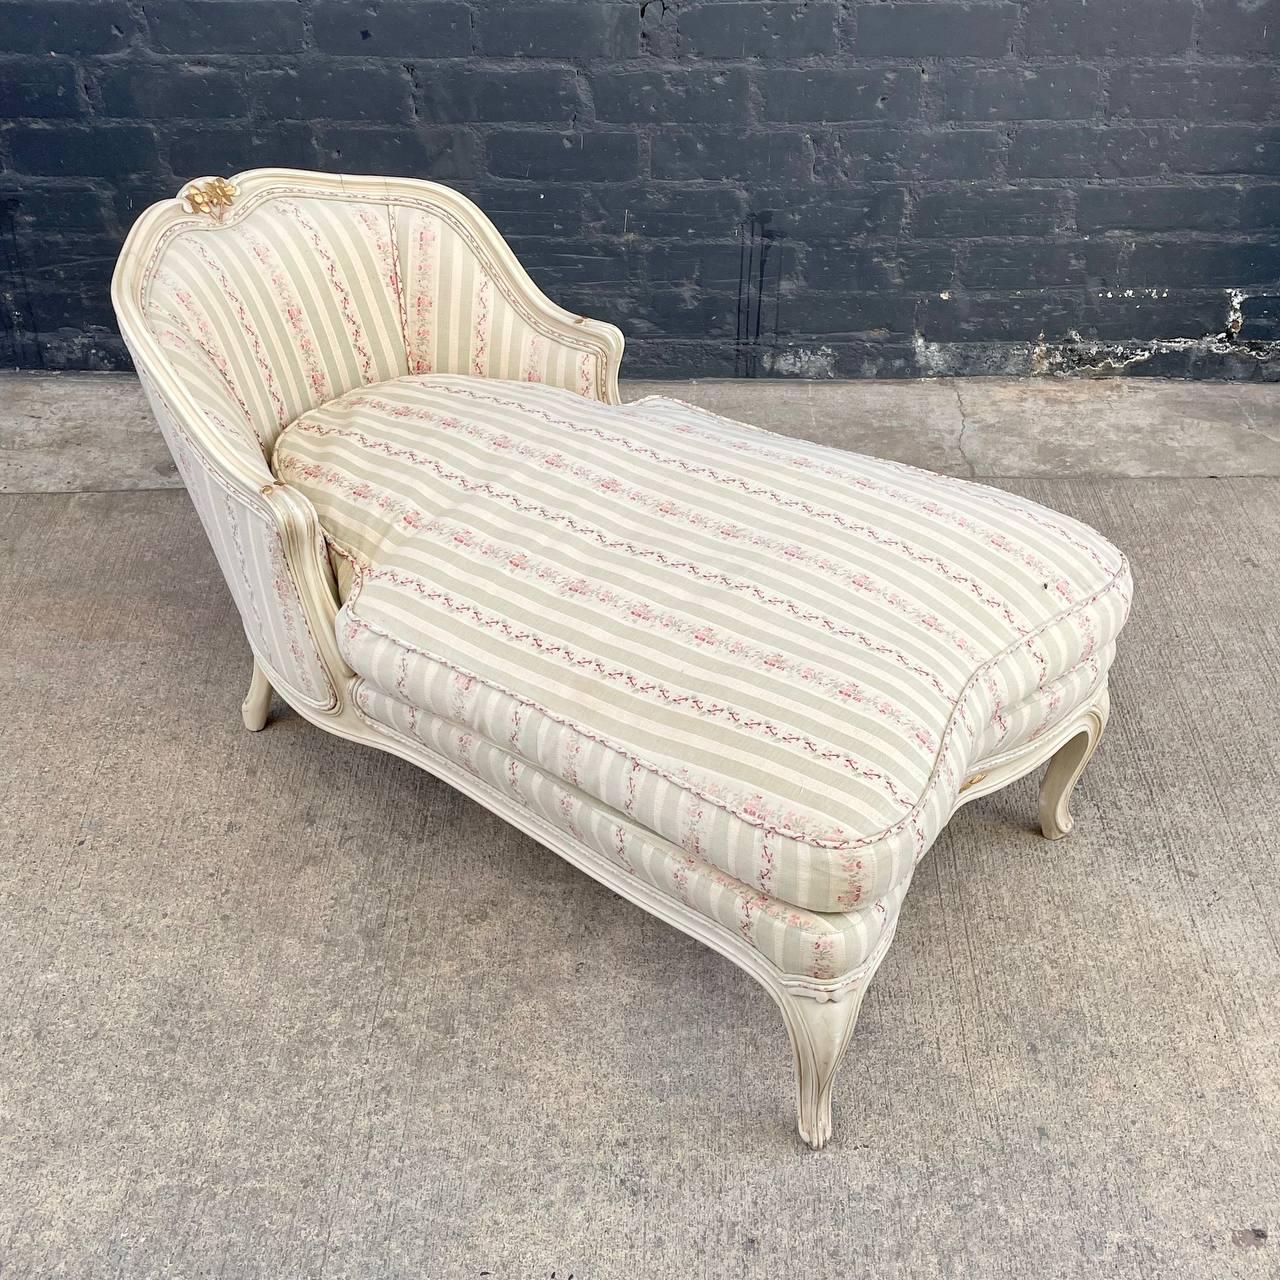 Vintage French Provincial Style Chaise Lounge Chair

Original Vintage Condition
Materials: Painted Wood, Gold Leaf, Original Upholstery
Dimensions: 
26��”H x 47”W x 25.50”D
Seat Height 17”